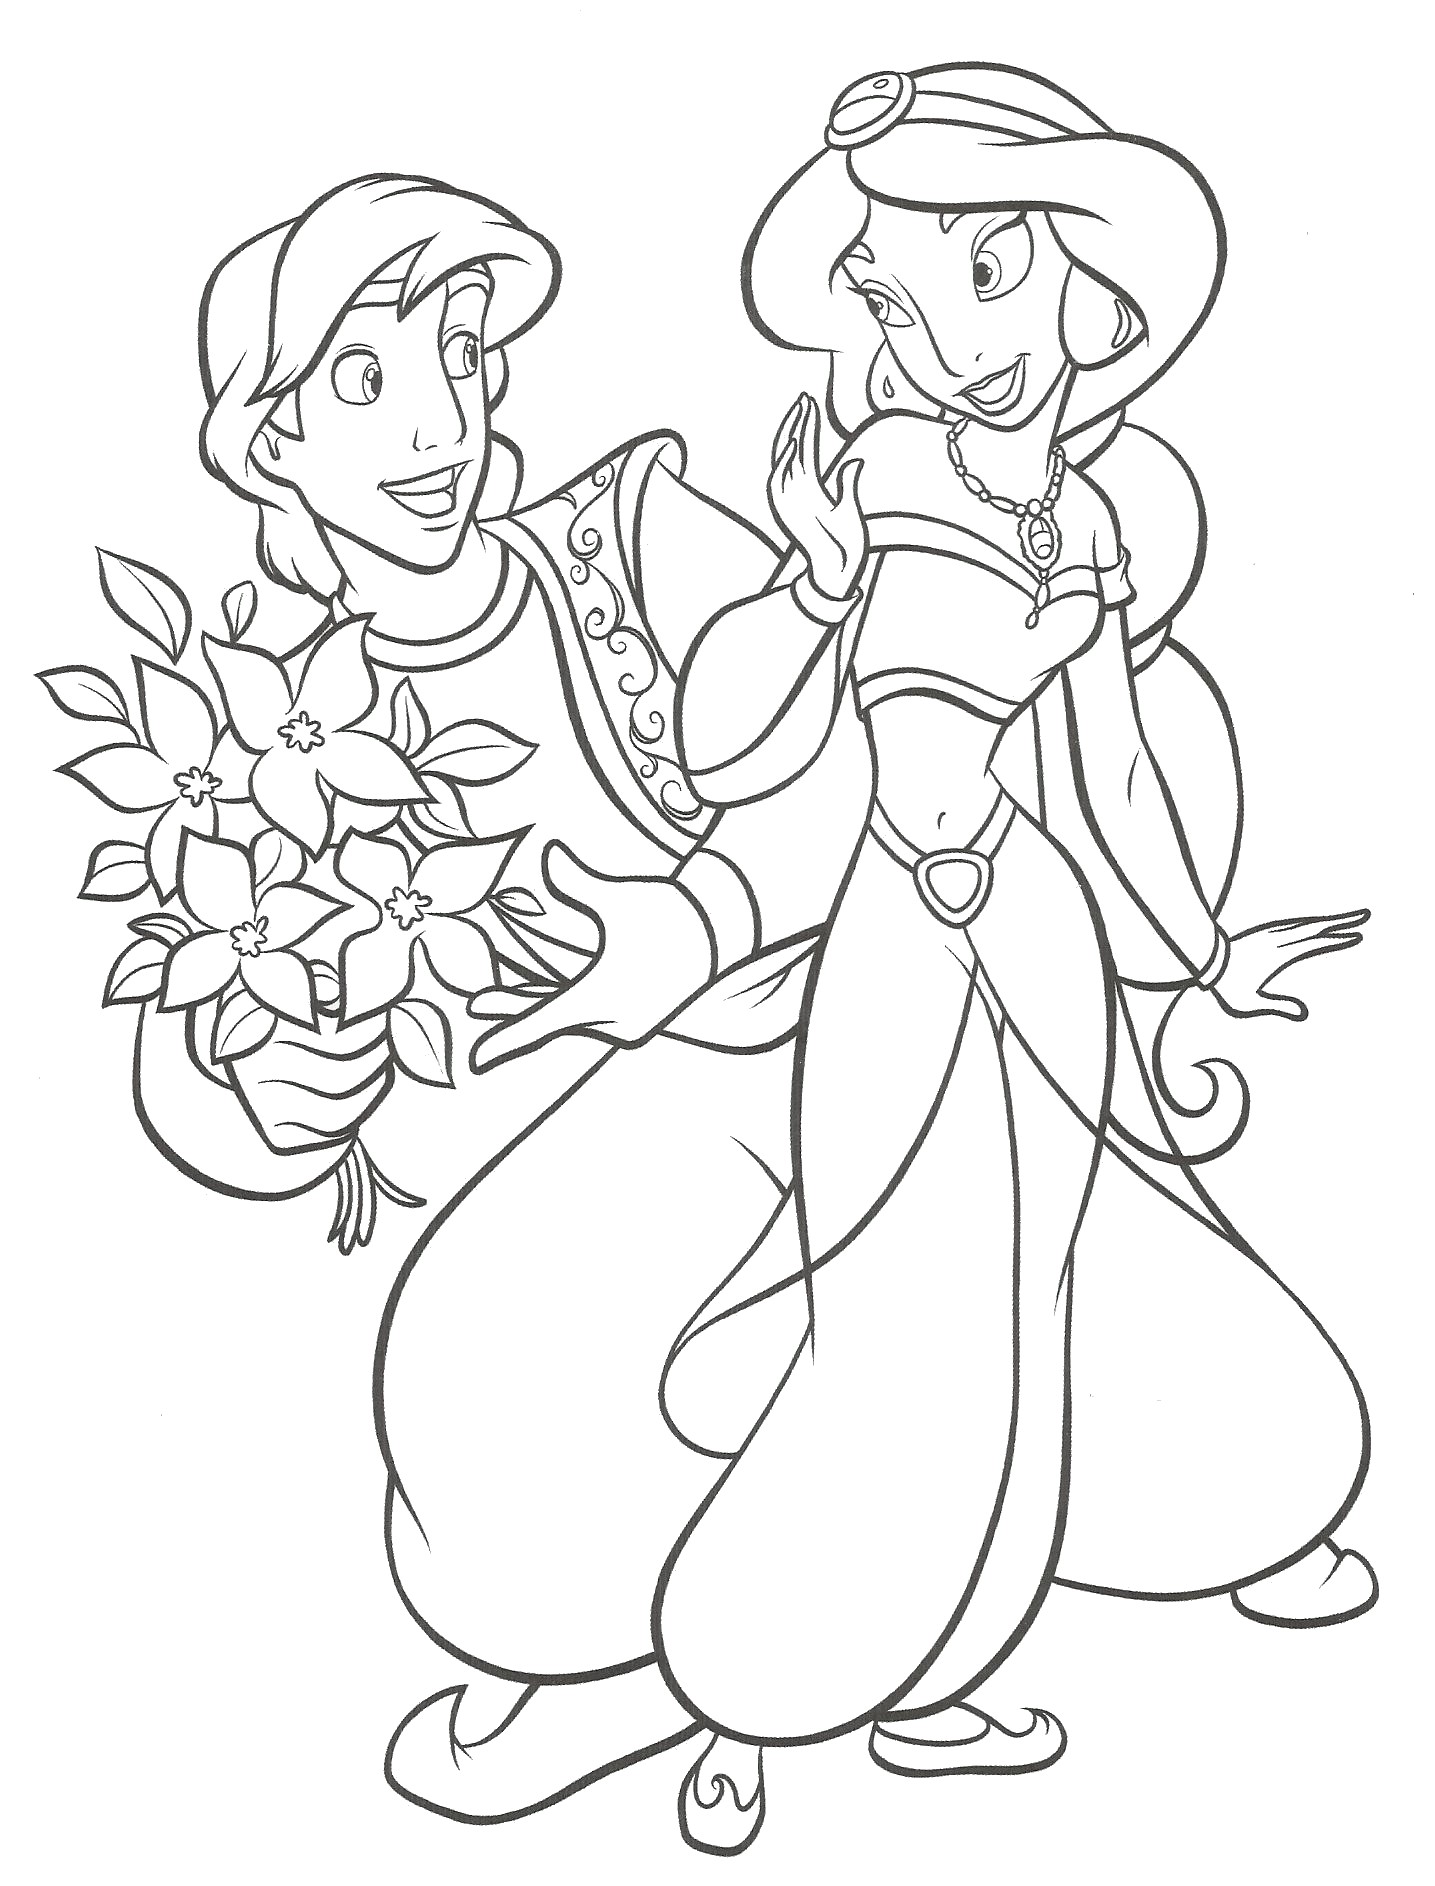 Aladdin Give Flower For Jasmine Coloring Page